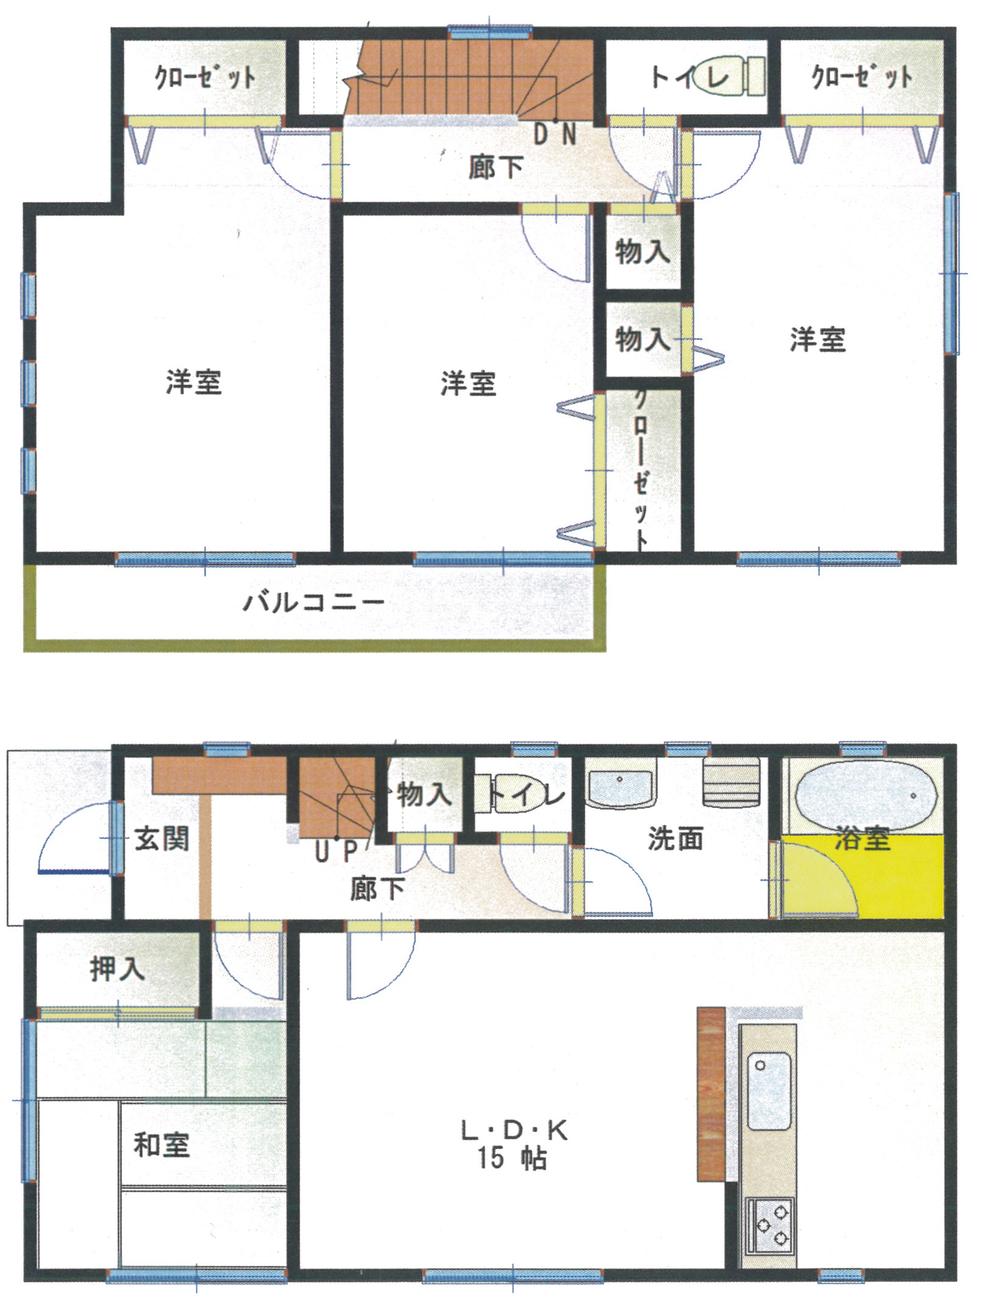 Floor plan. 22,800,000 yen, 4LDK, Land area 166.85 sq m , If the building area 102.87 sq m drawings and the present situation is different, it has a priority to the present situation. 